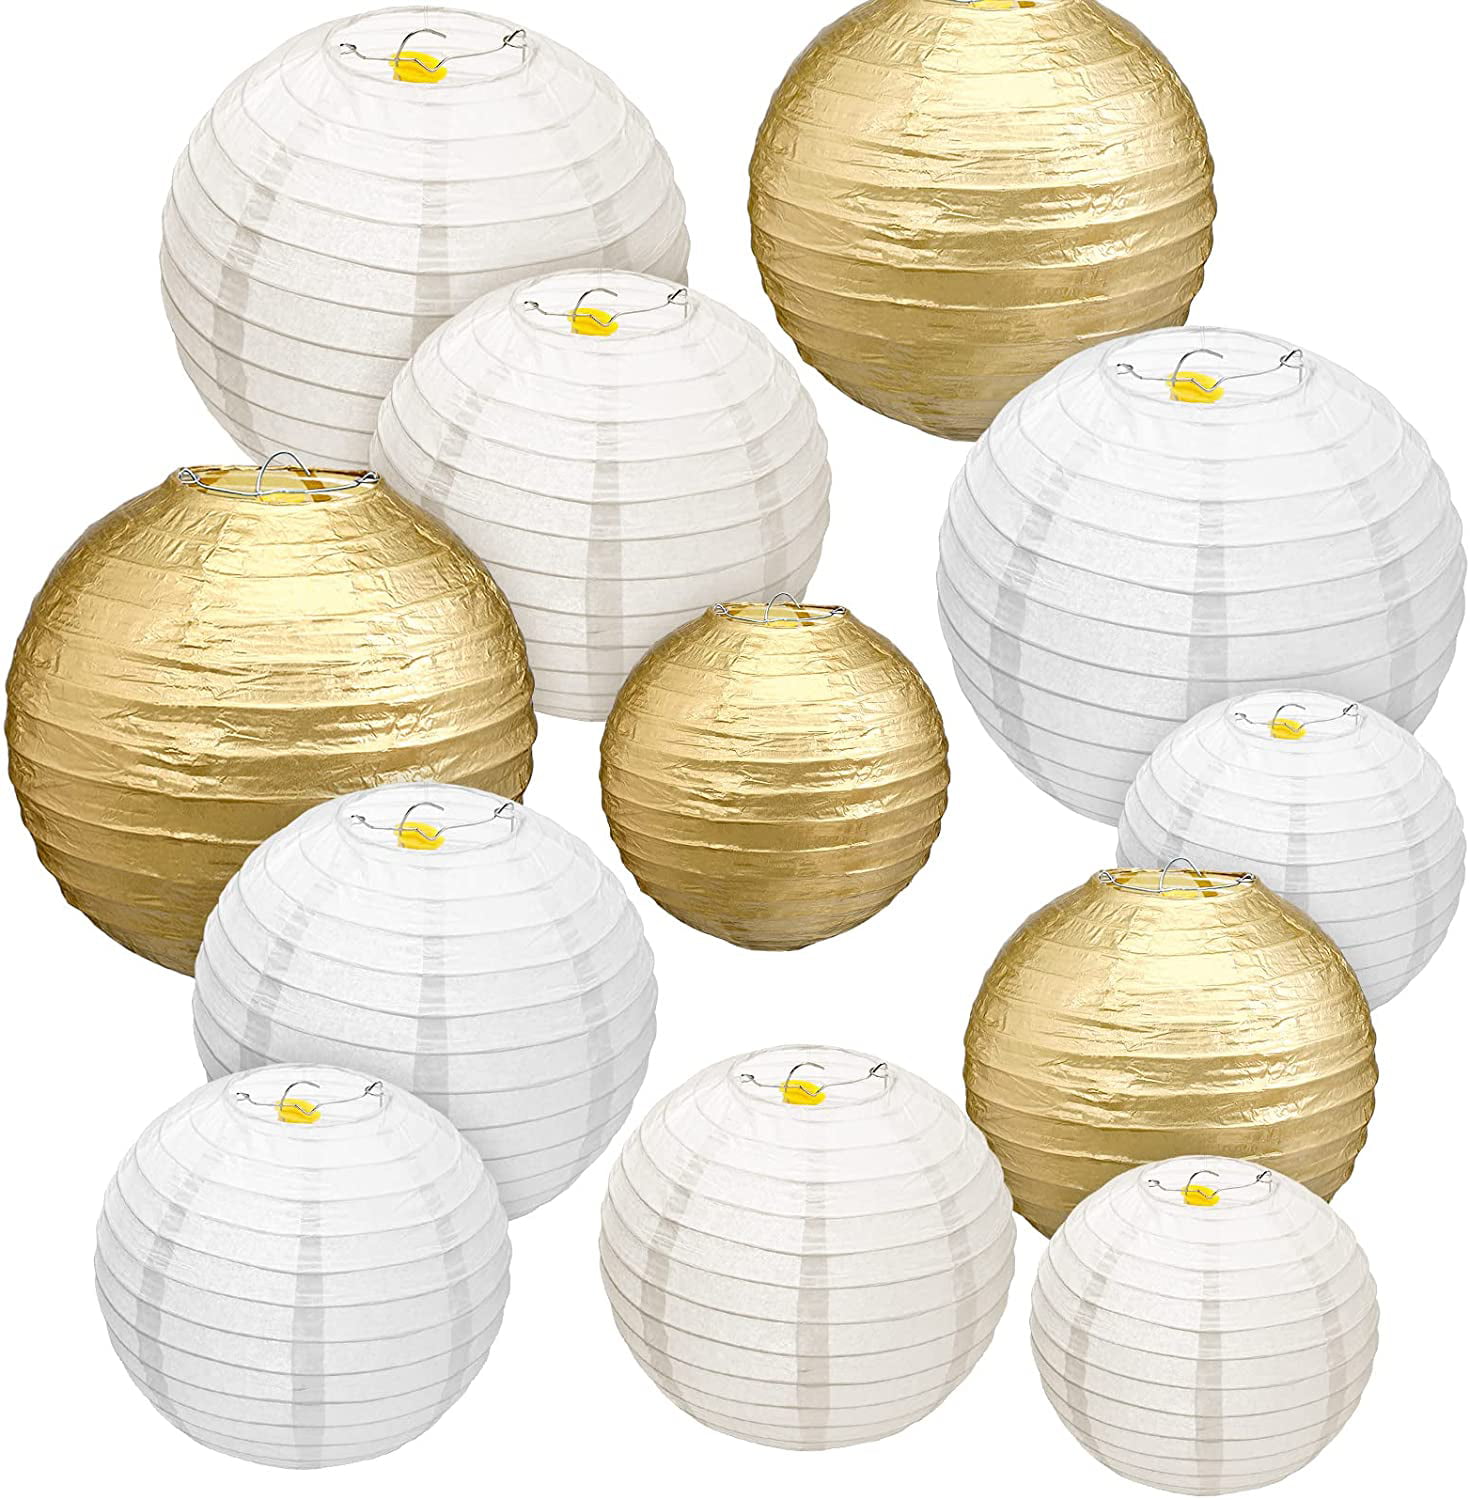 Wedding Party Event Decoratio mm White 10 pcs 8" inch Chinese Paper Lantern 